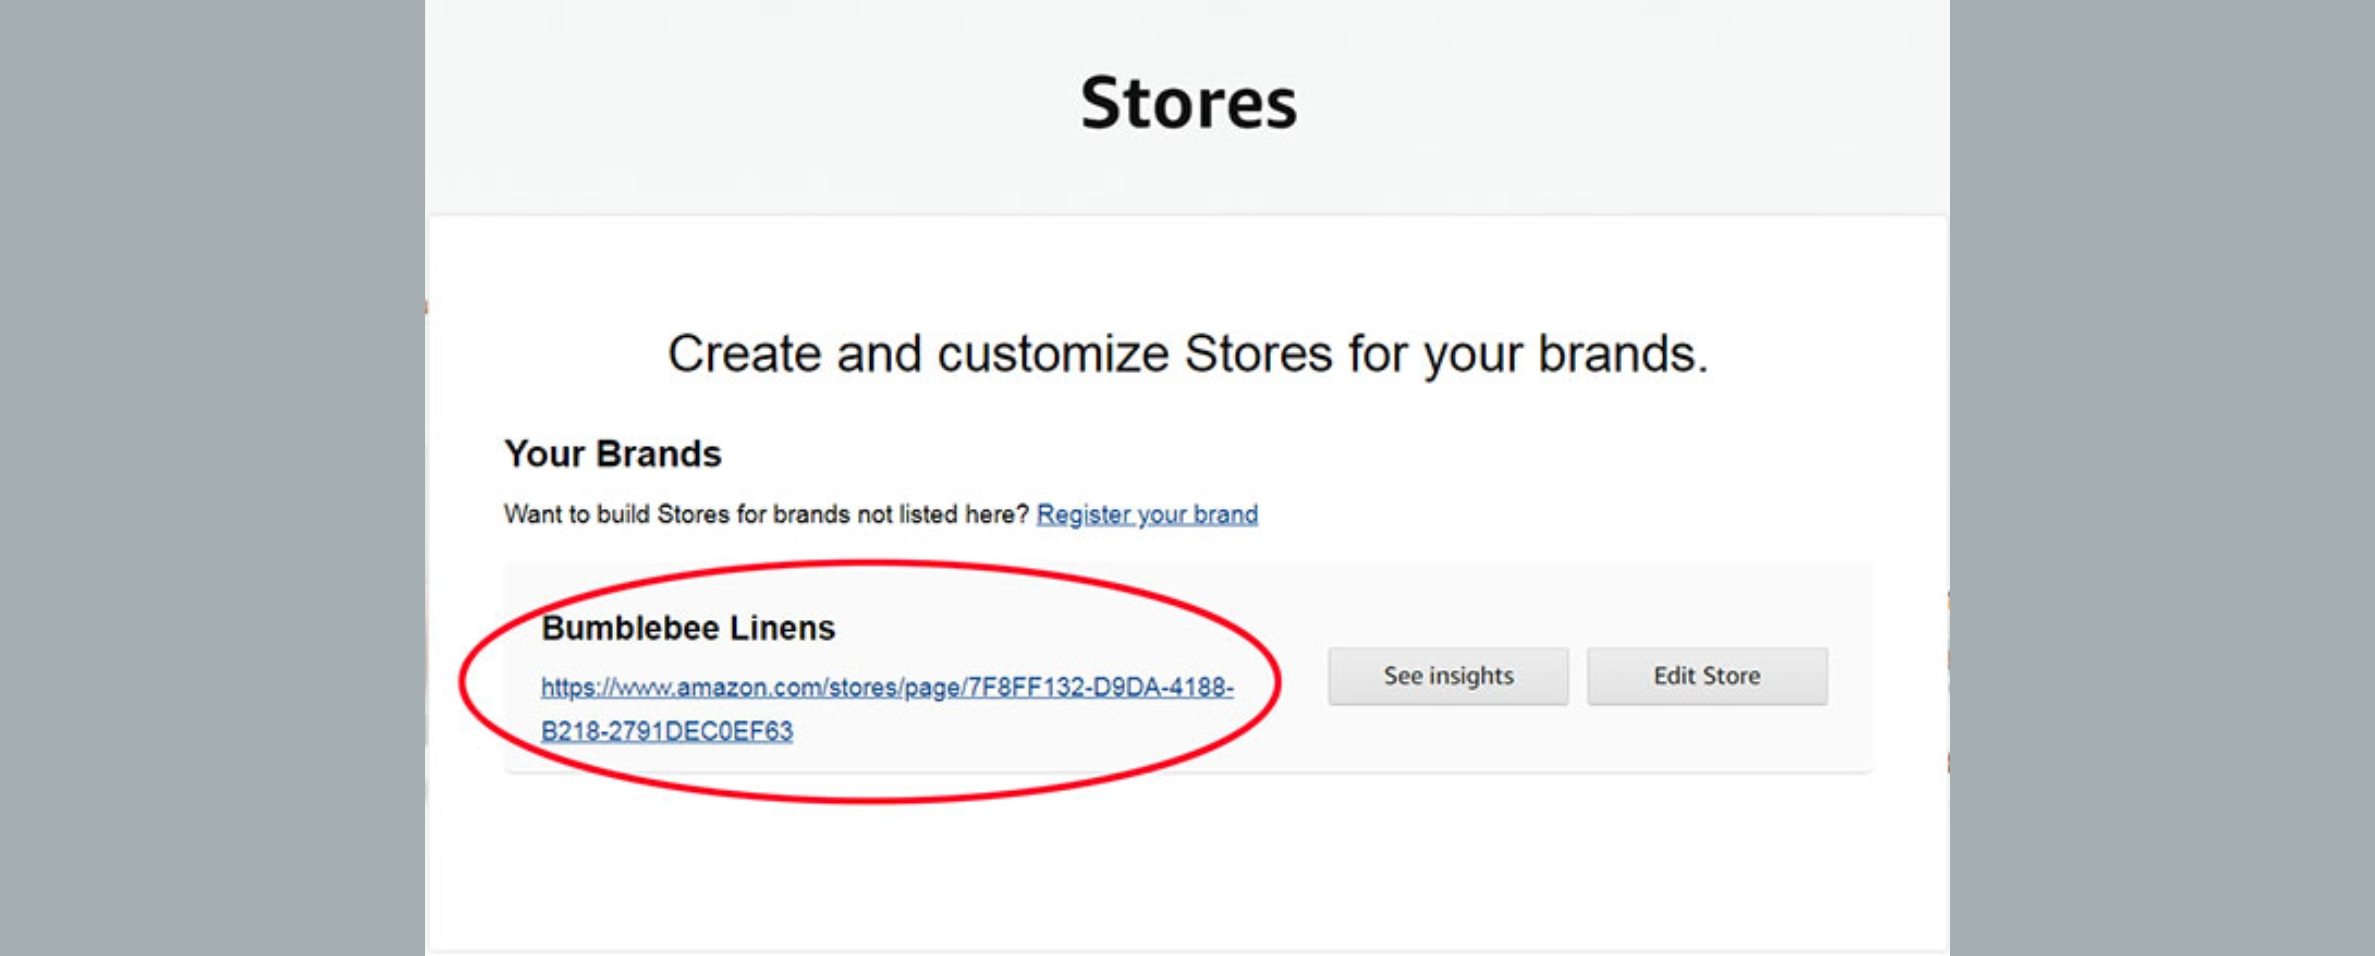 Customize your amazon storefront with a vanity URL.